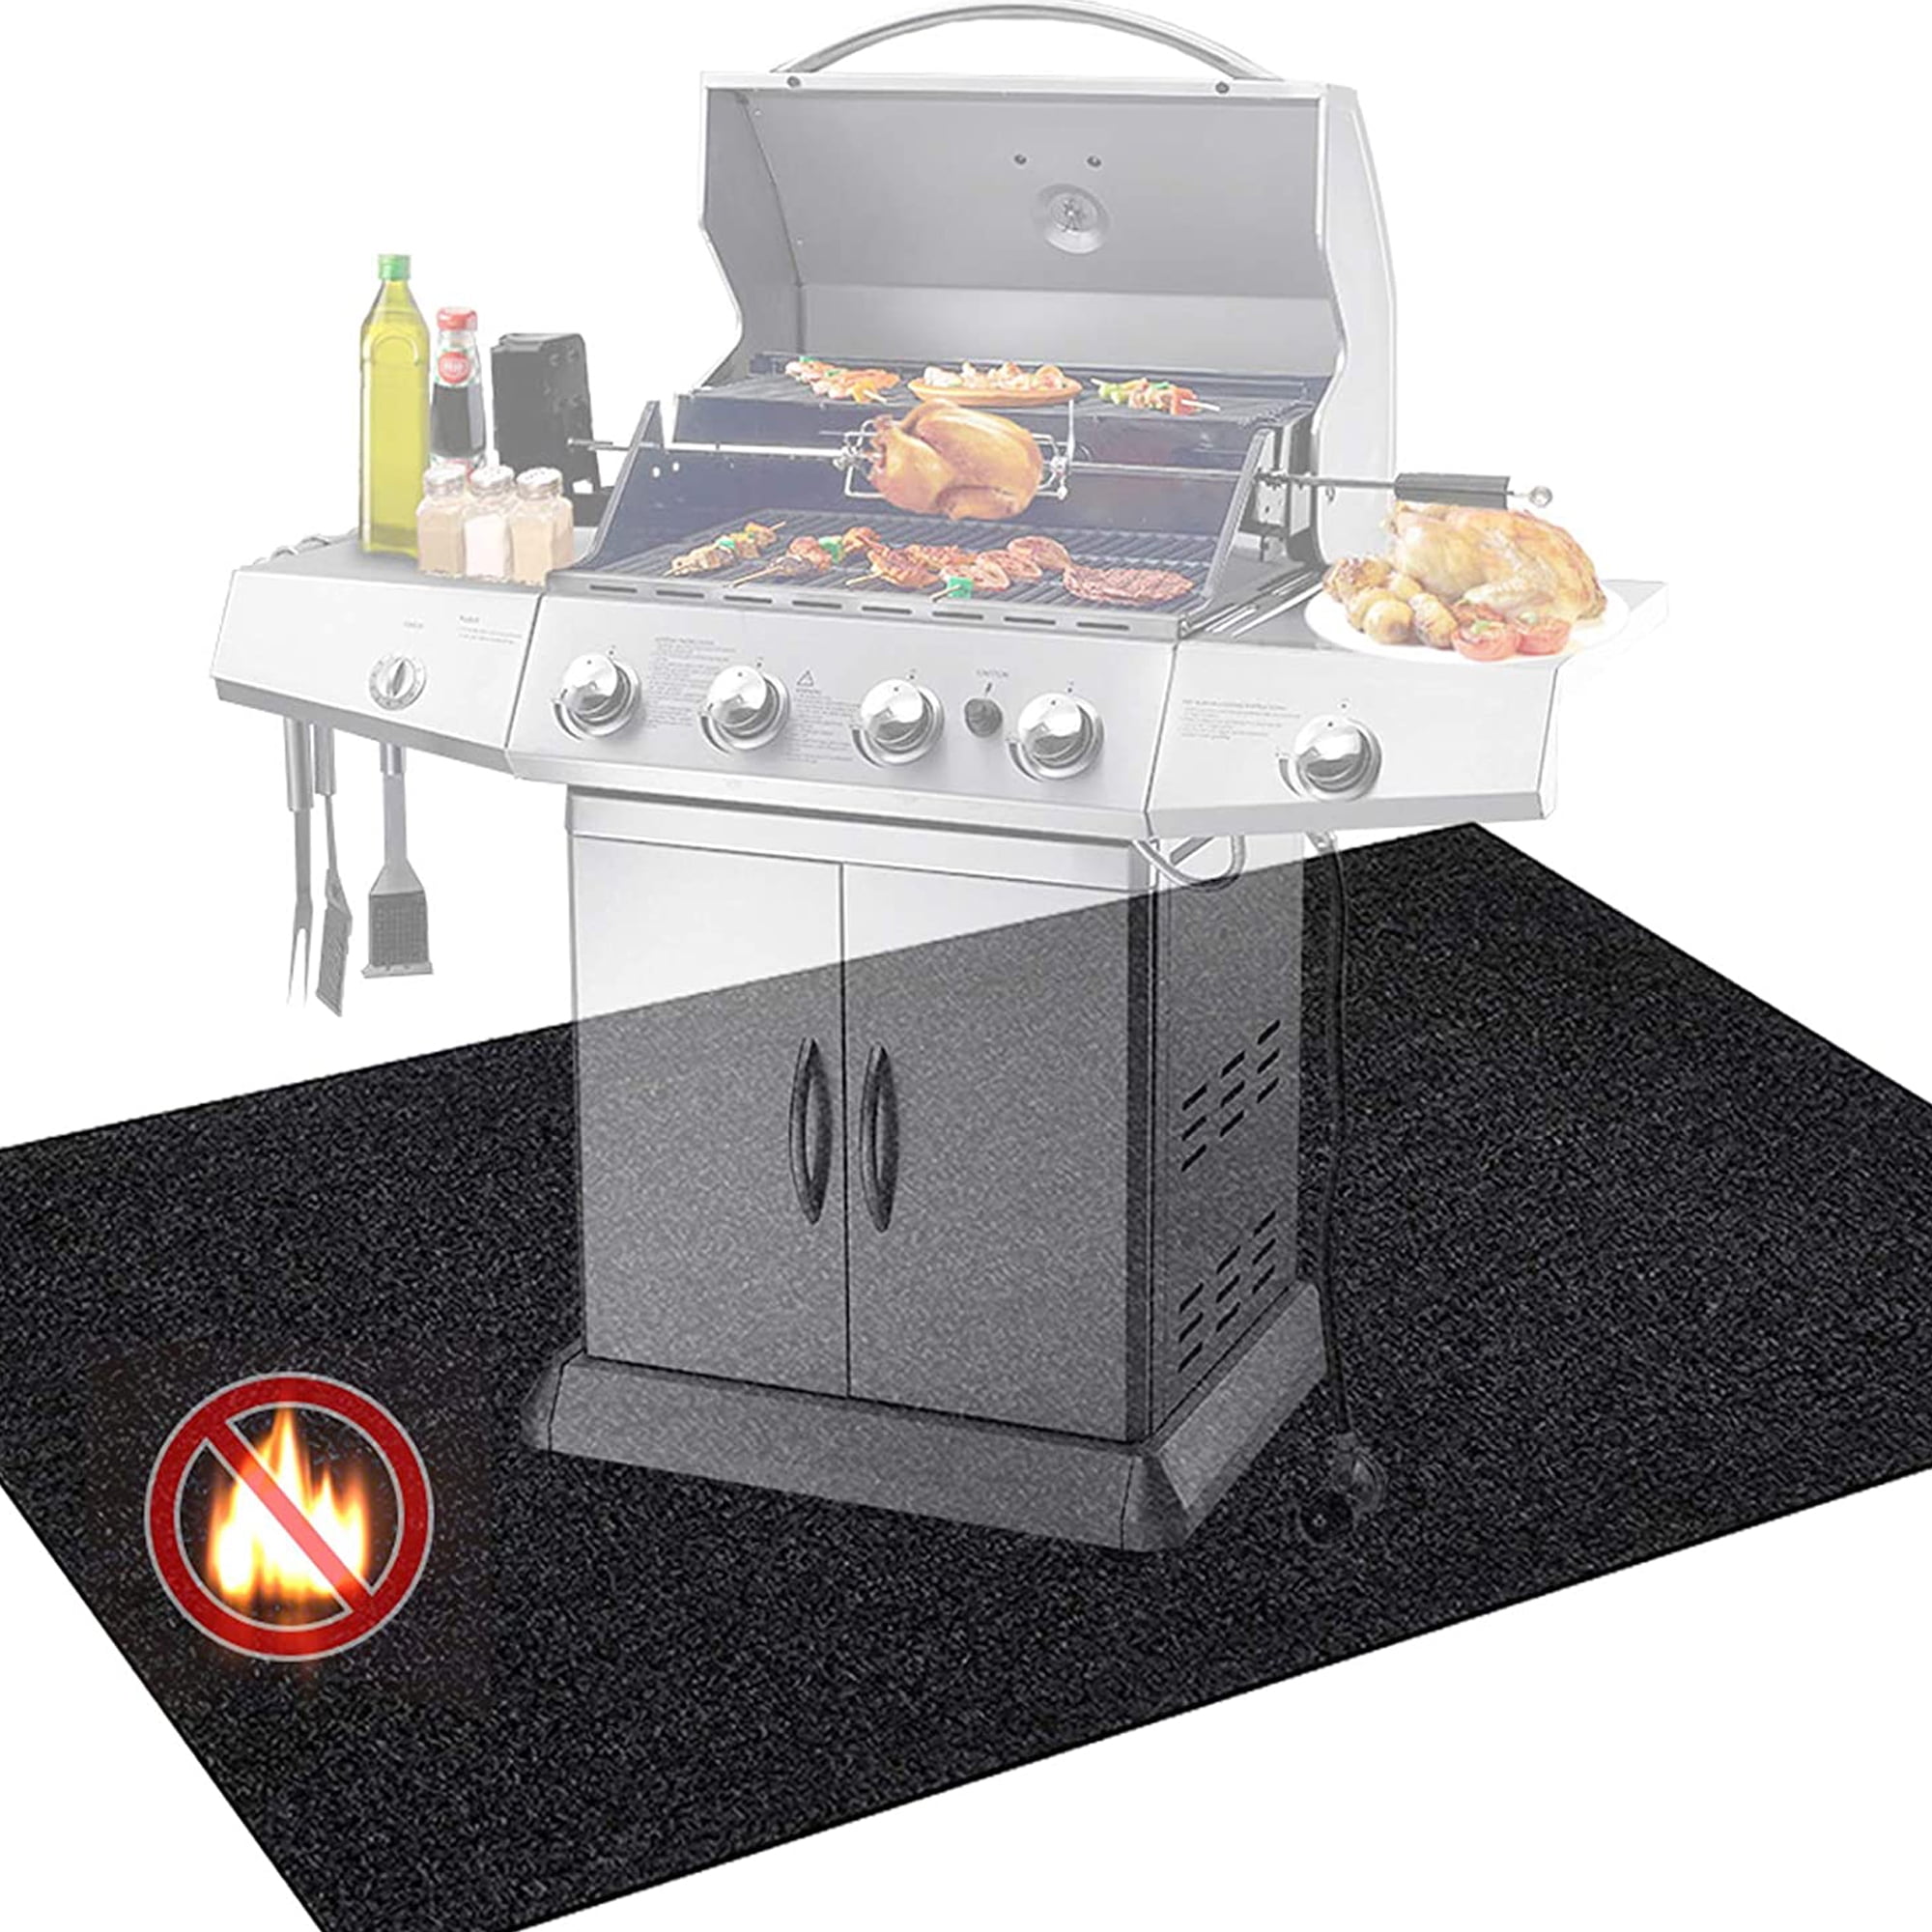 Details about   Under Grill Gear Flame Retardant Mats Barbecue Grilling for Absorbing Oil Pad 